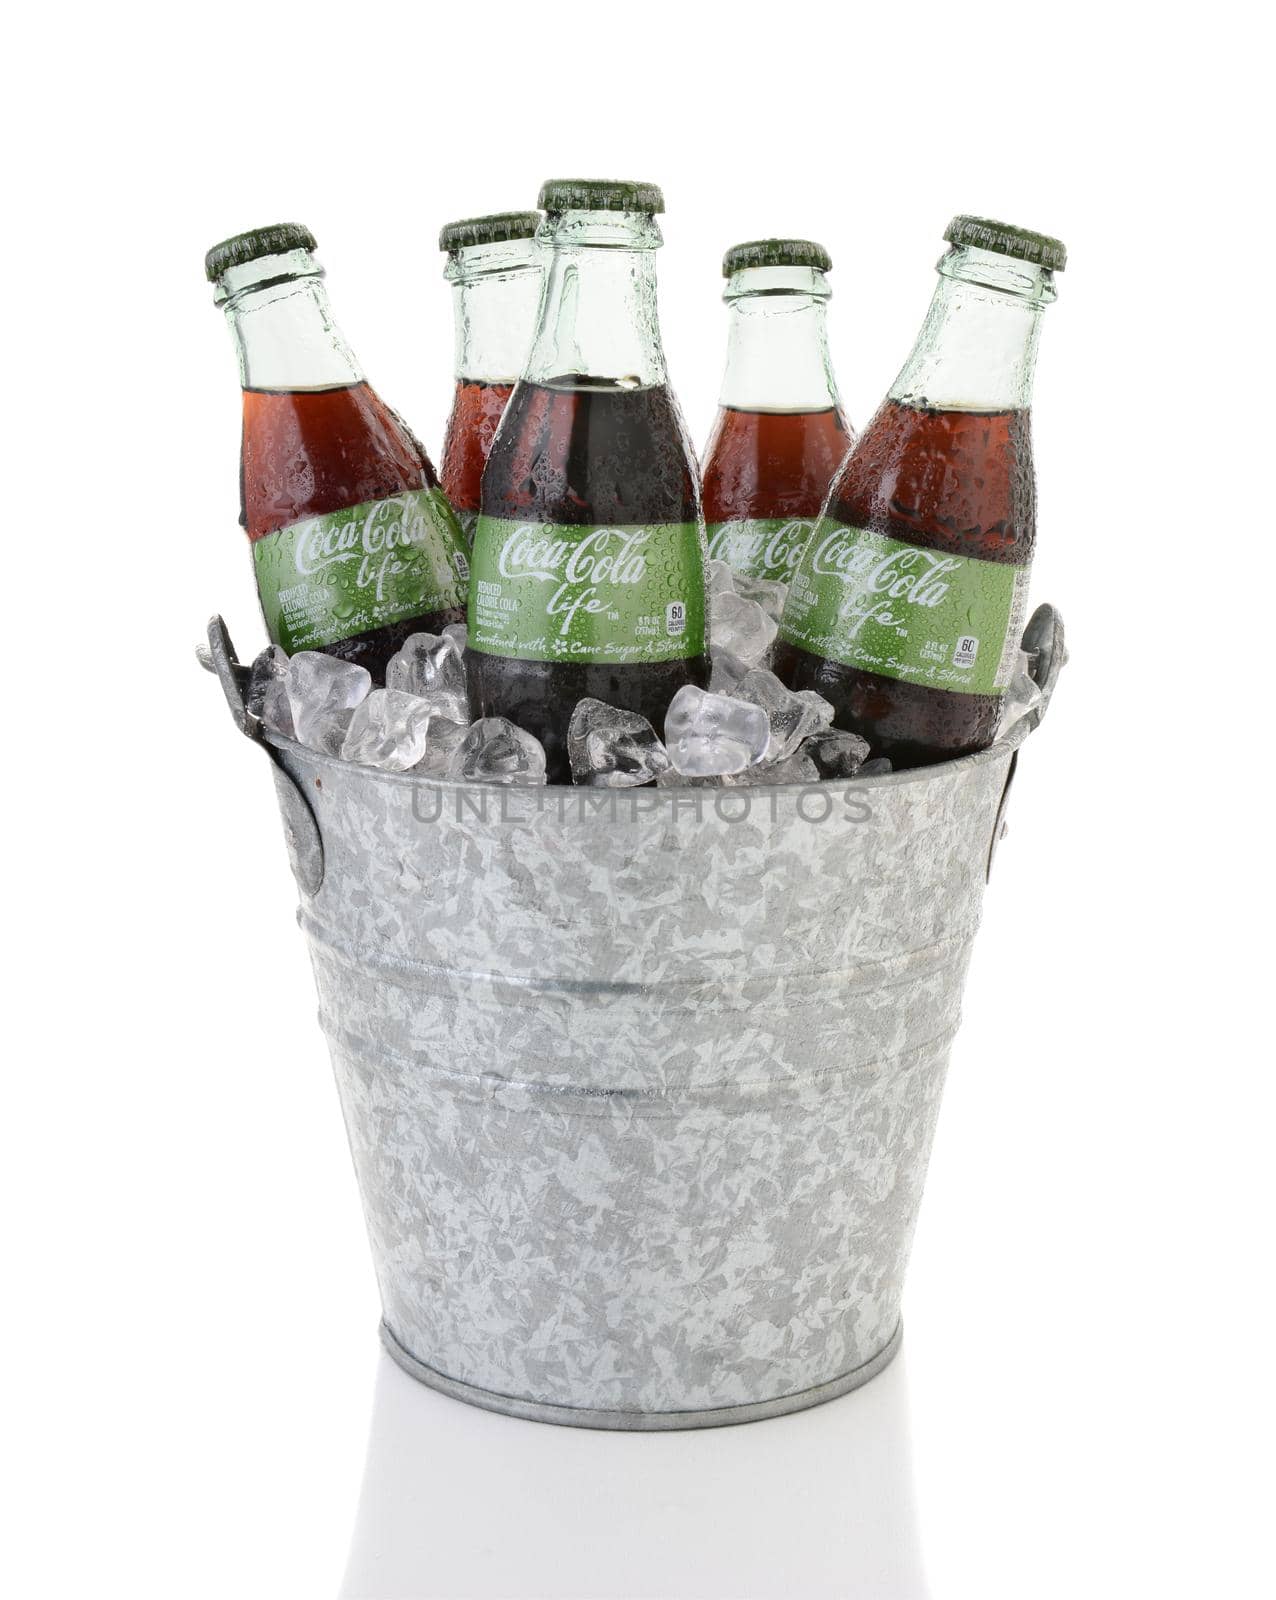 IRVINE, CA - FEBRUARY 15, 2015: Coca-Cola Life bottles in an ice bucket. A reduced calorie soft drink sweetened with cane sugar and Stevia, containing 60% of the calories of Classic Coke.